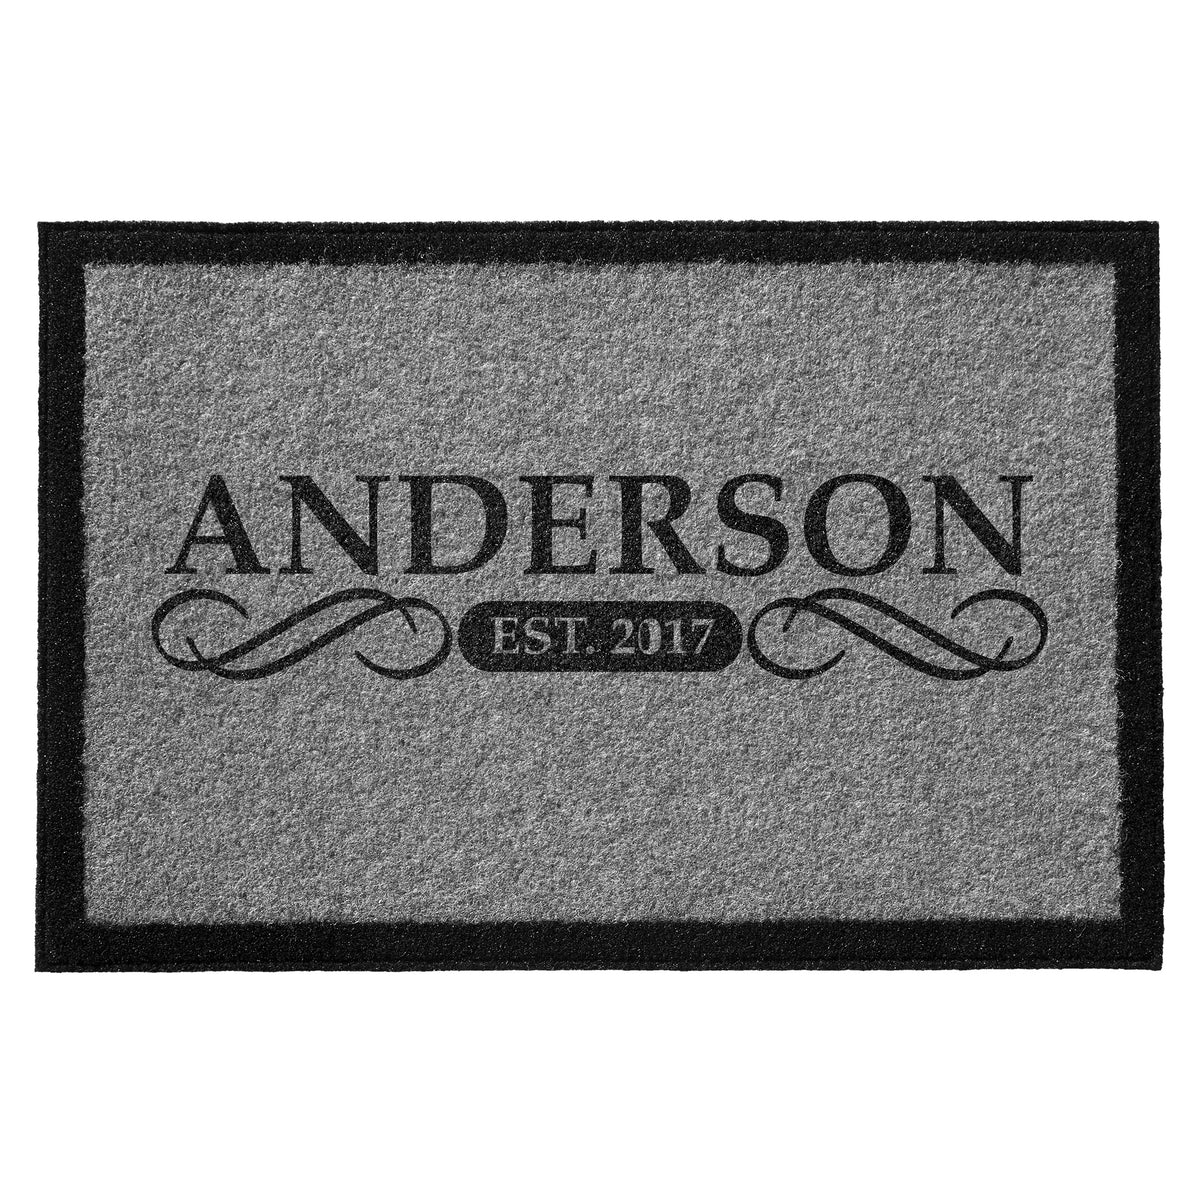 Infinity Custom Mats™ All-Weather Personalized Door Mat - STYLE: ANDERSON COLOR: GREY / BLACK - rugsthatfit.com